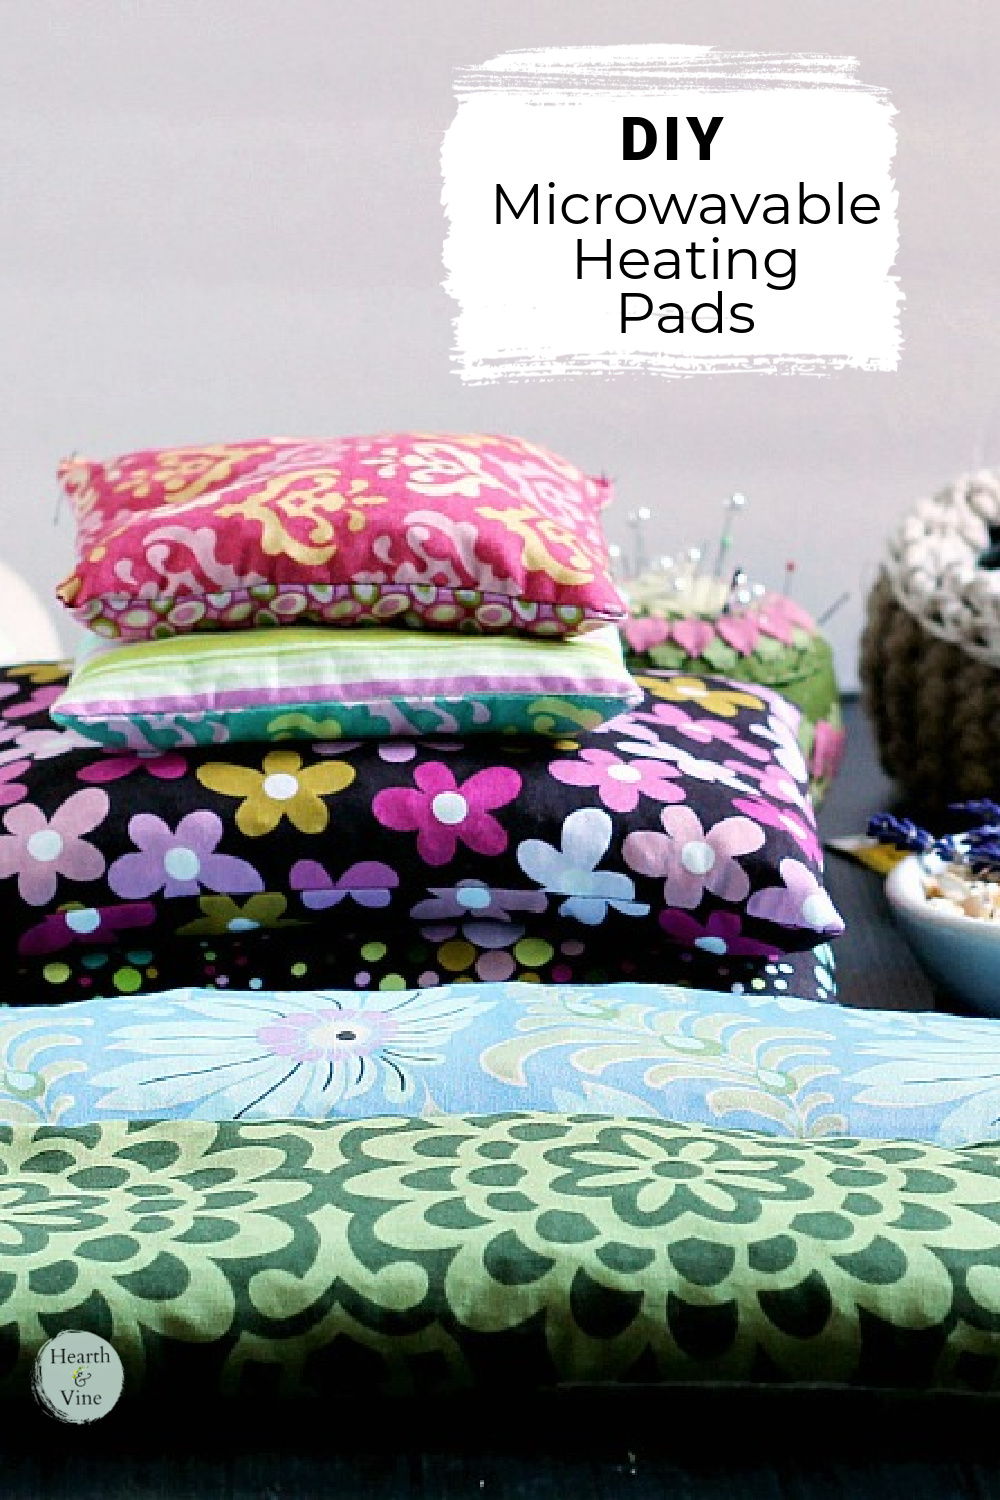 Stack of different colored are patterned fabric corn filled heating pads.